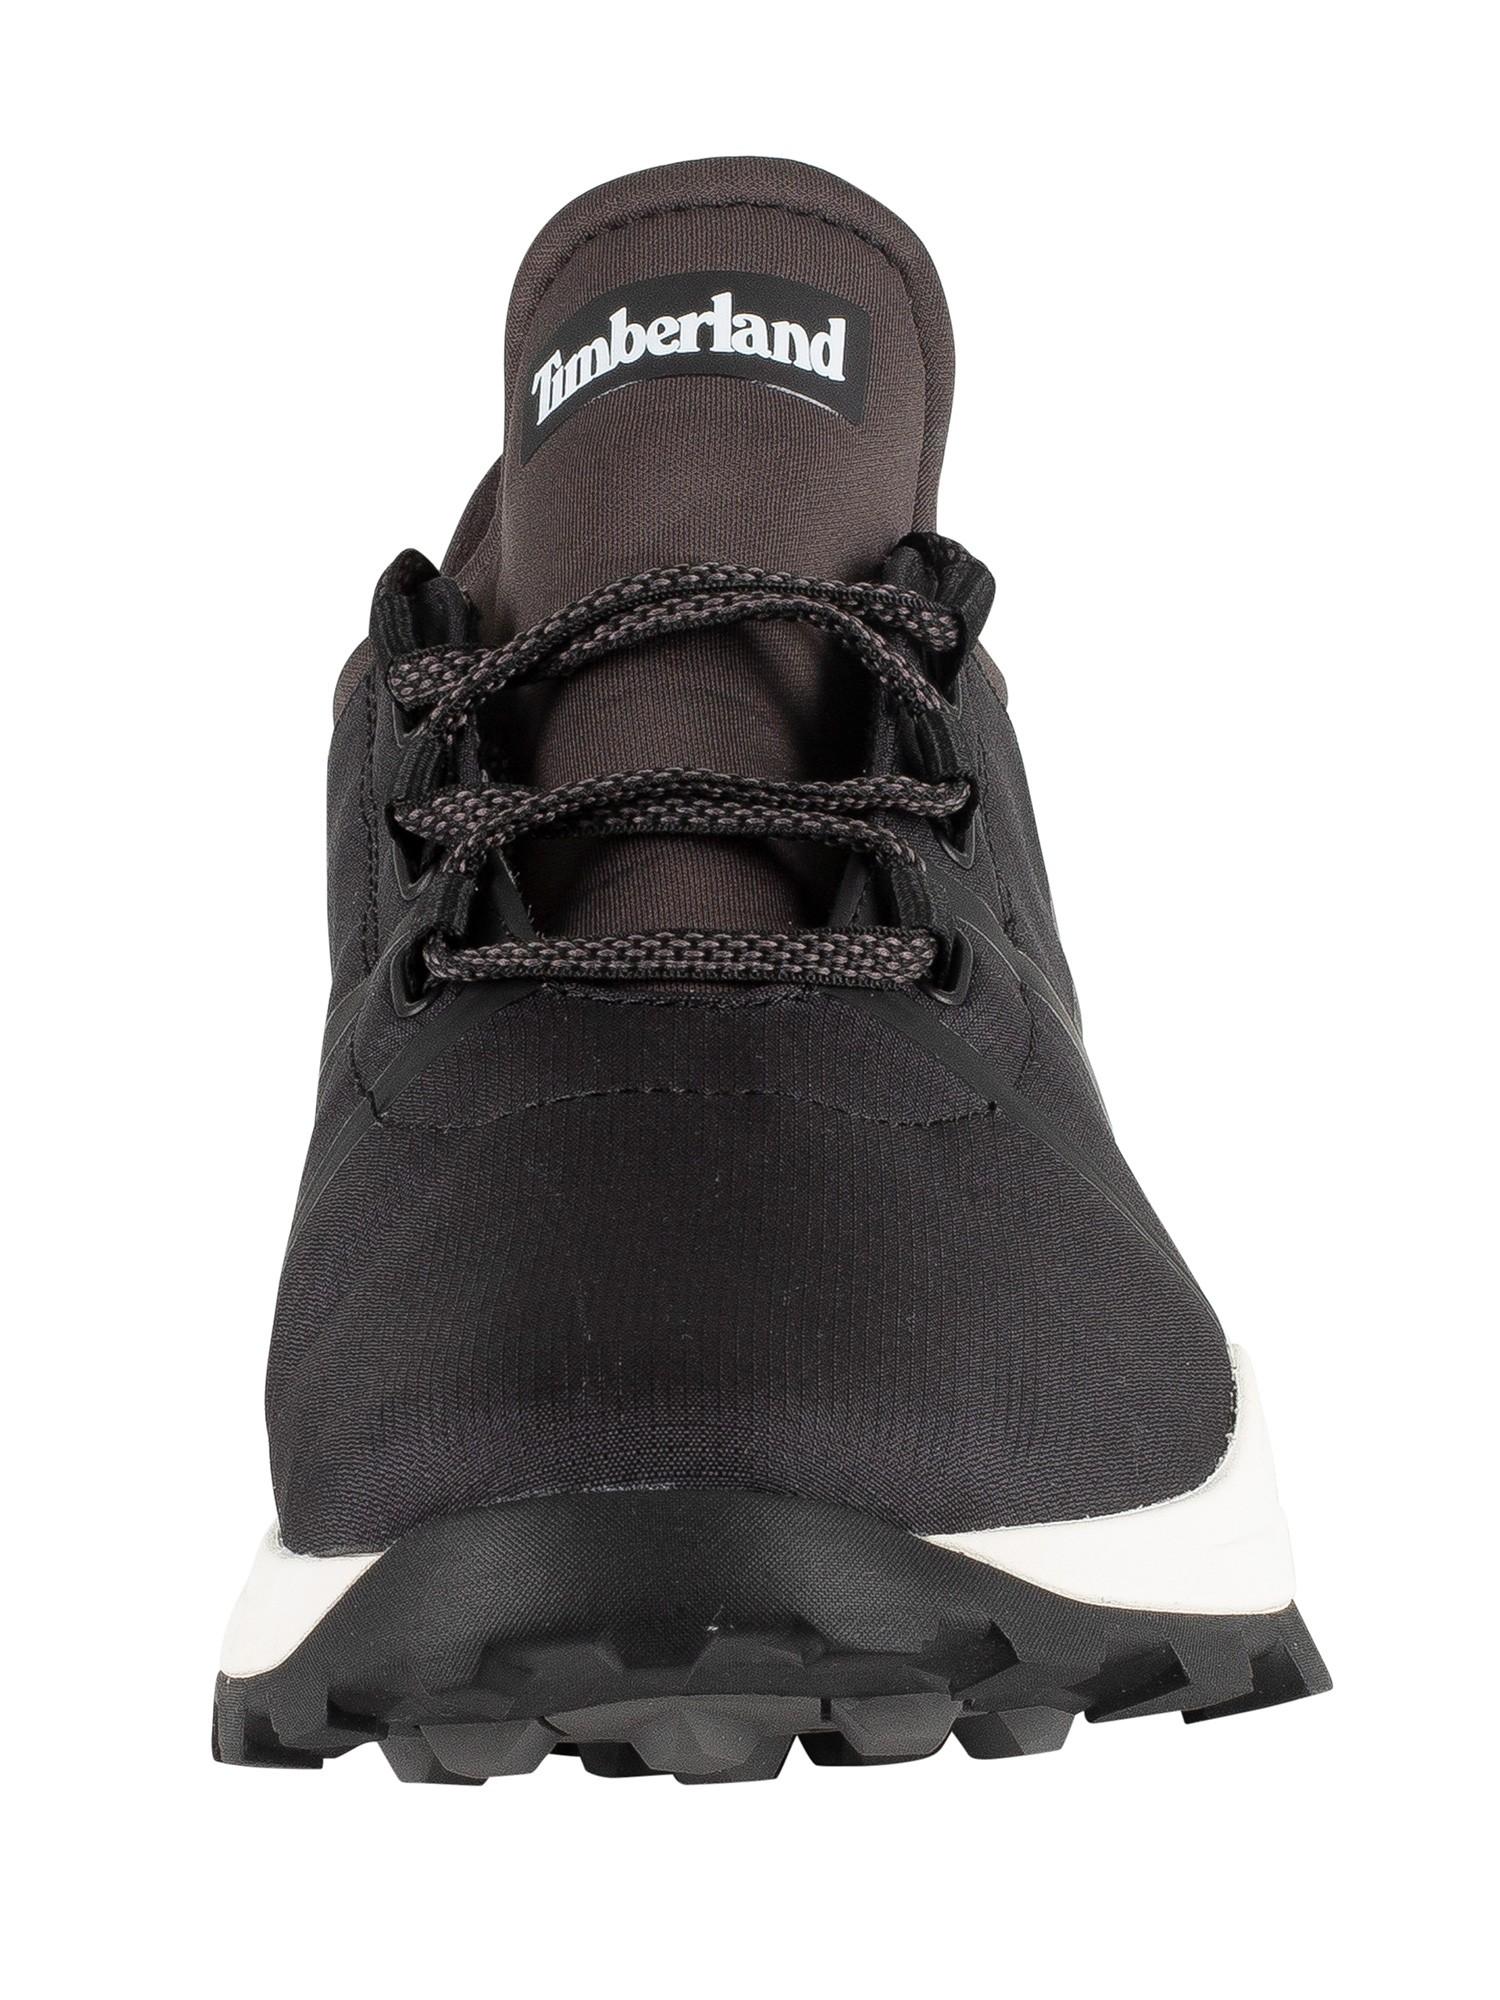 Timberland Suede Brooklyn Oxford Trainers in Black for Men - Lyst